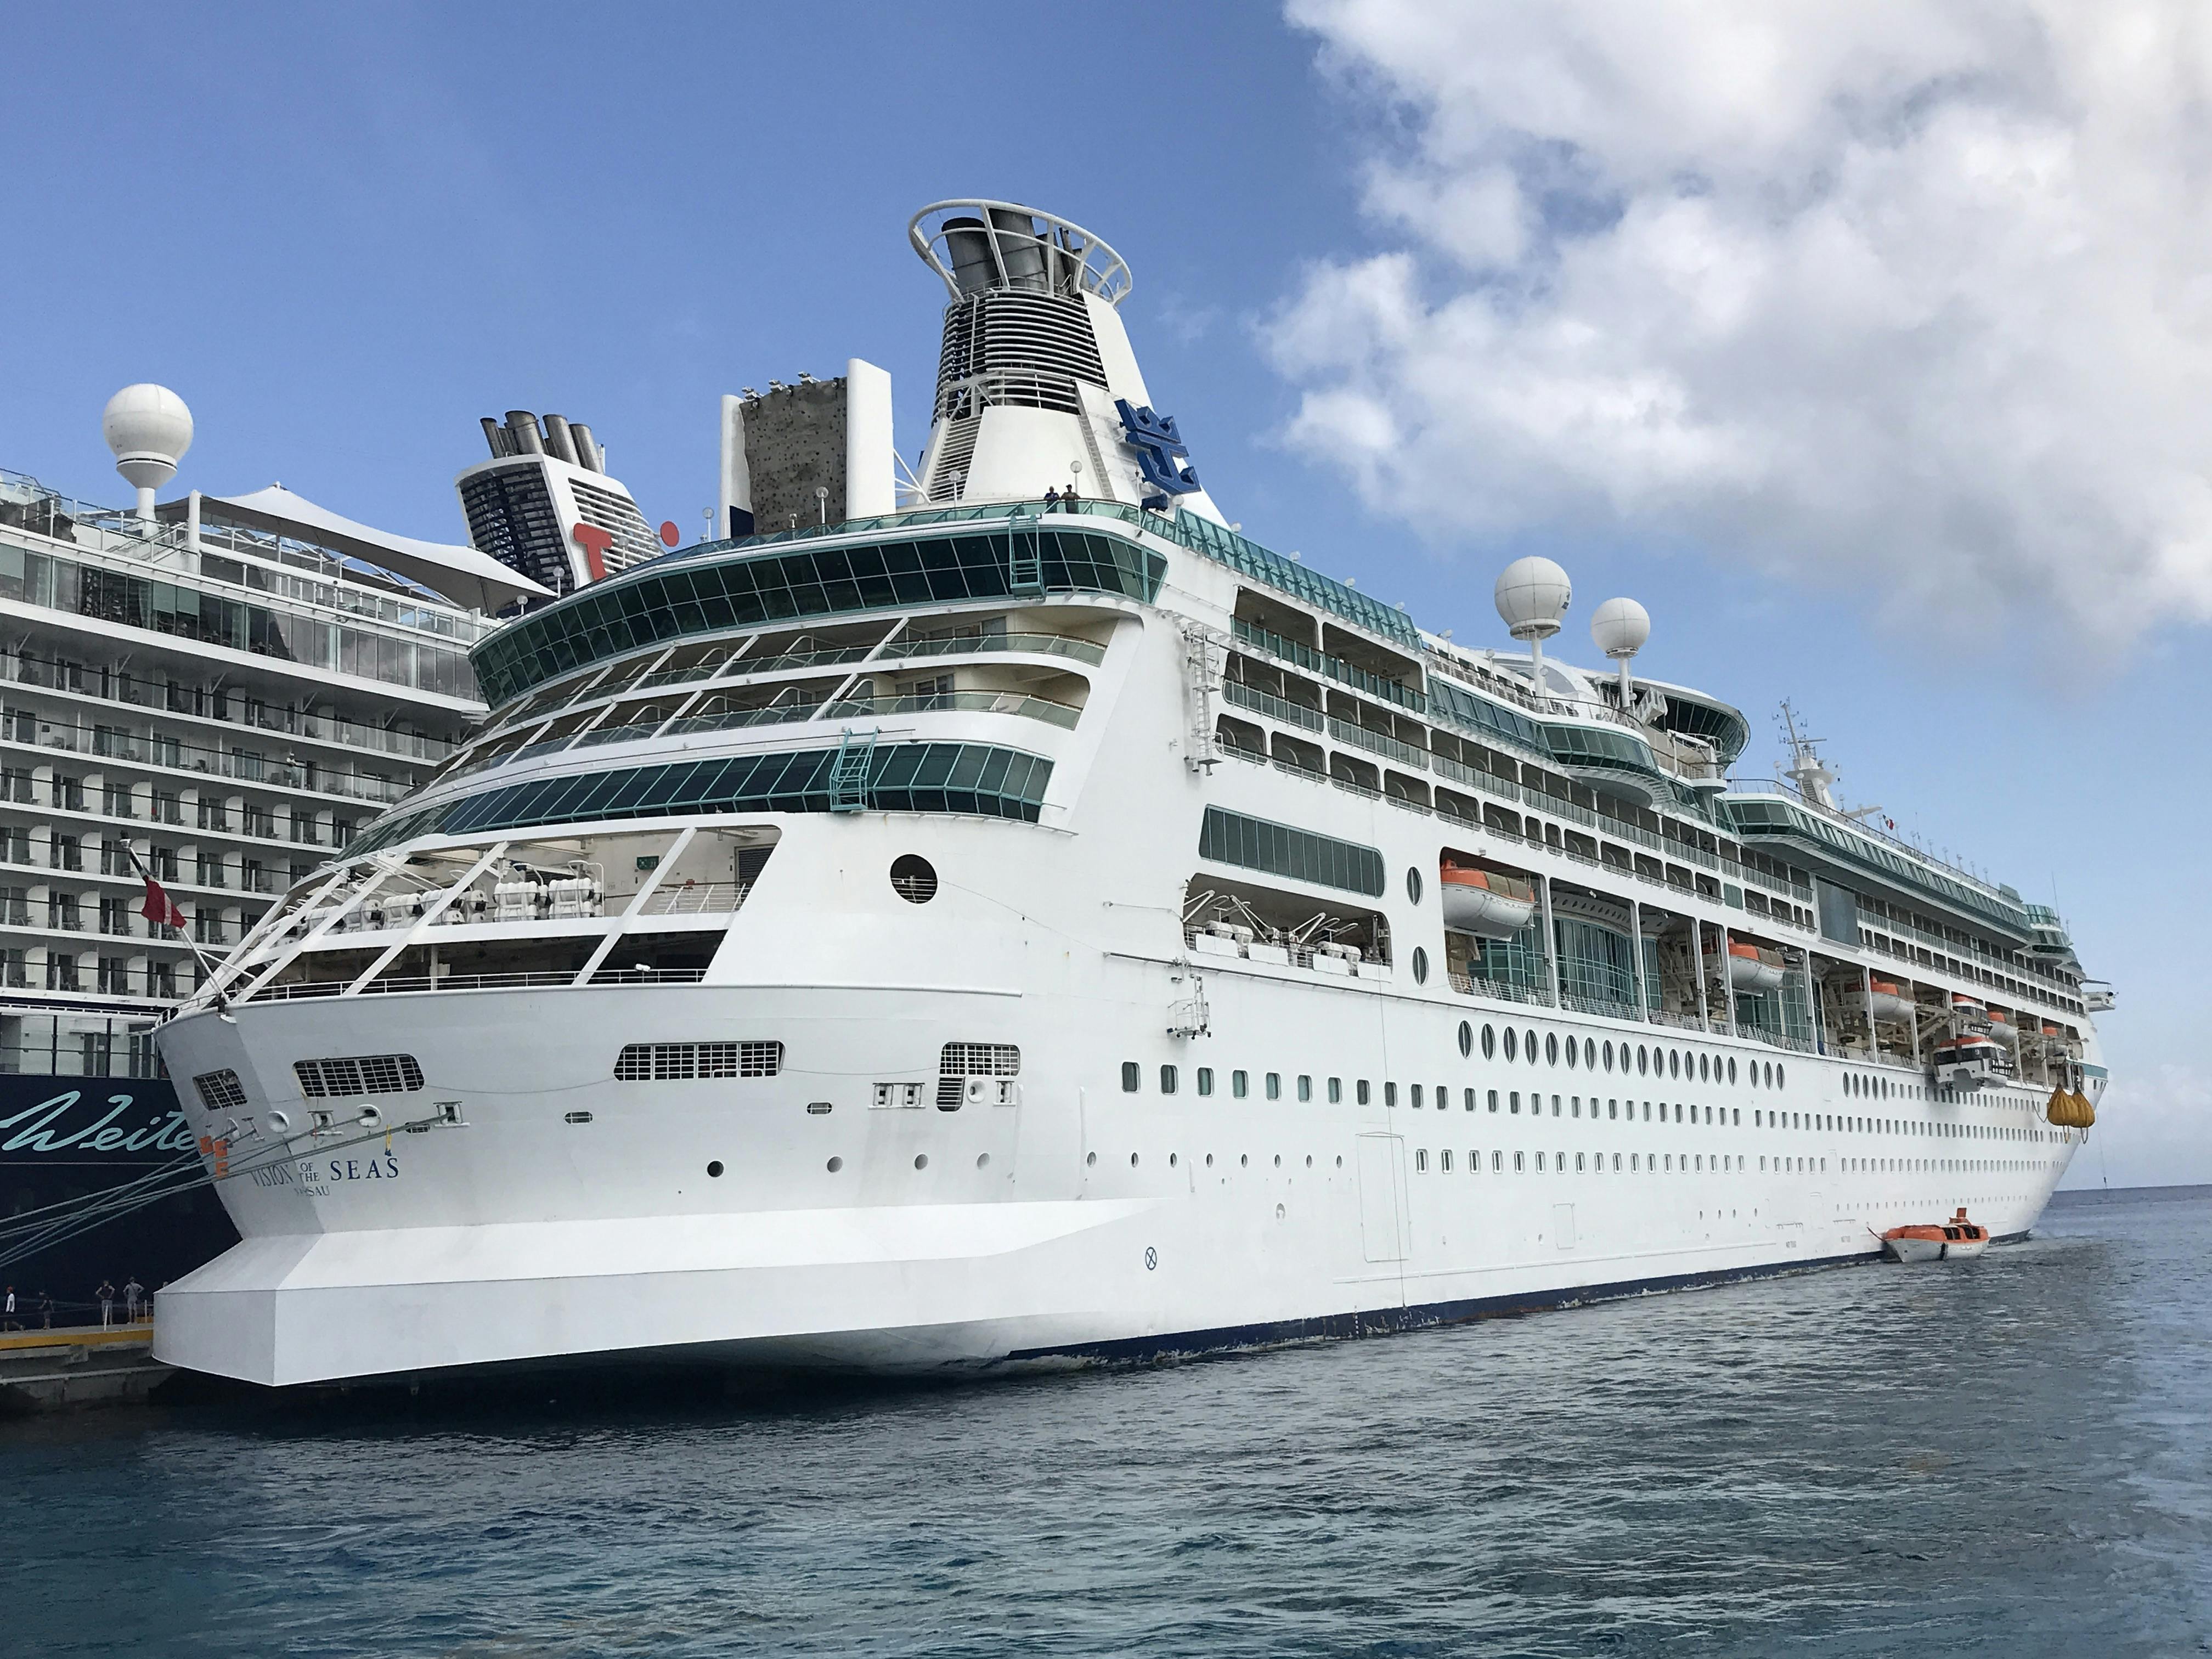 Vision of the Seas Cruise Review by SHumphrey - March 19, 2018